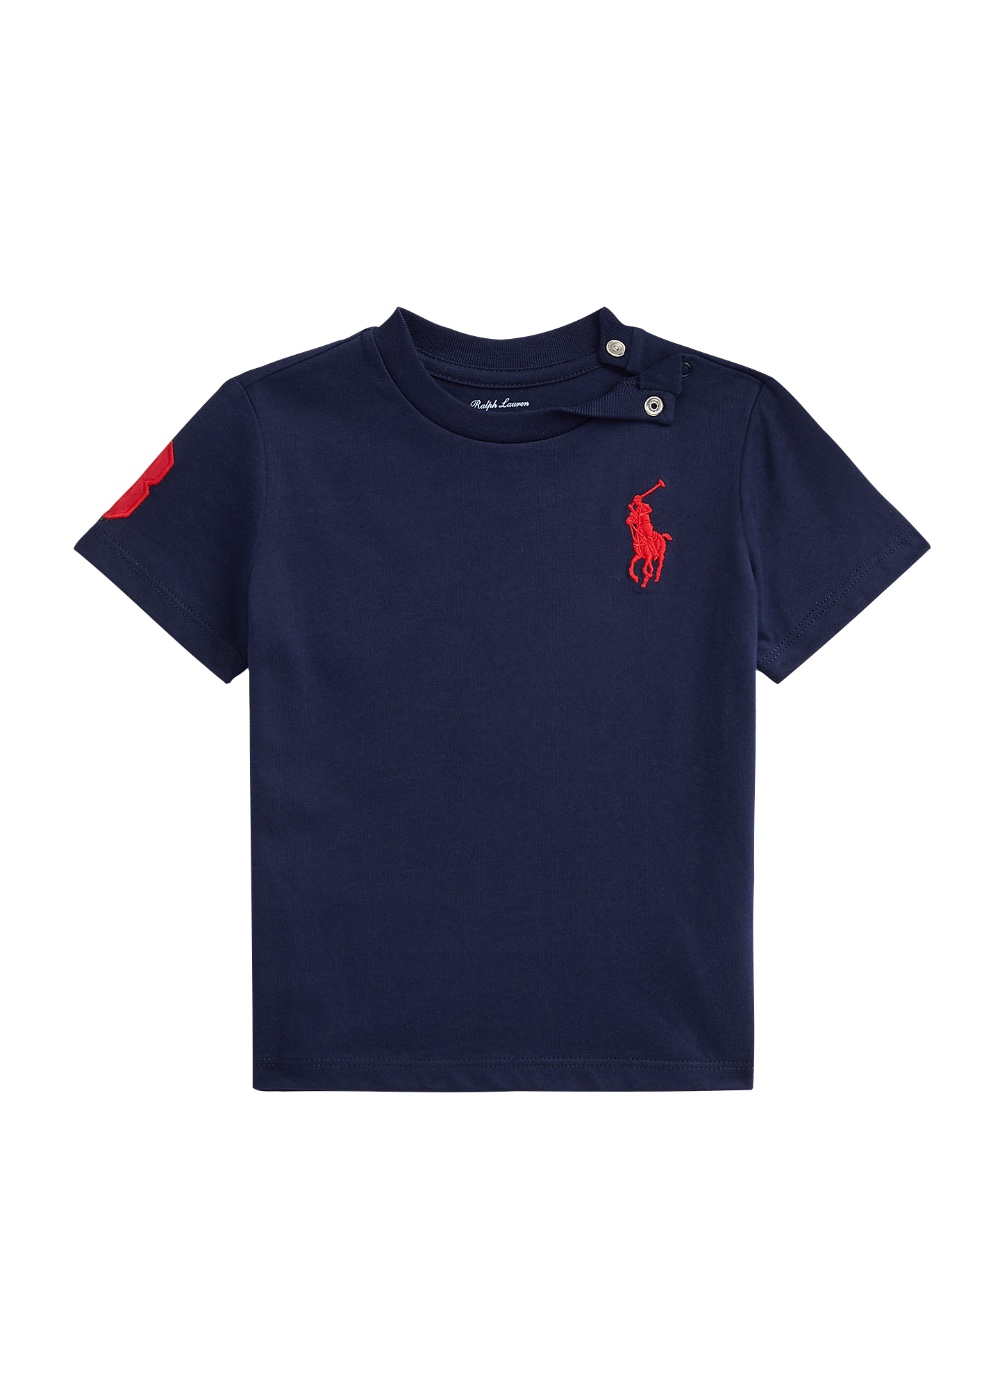 Featured image for “POLO RALPH LAUREN BIG PONY”